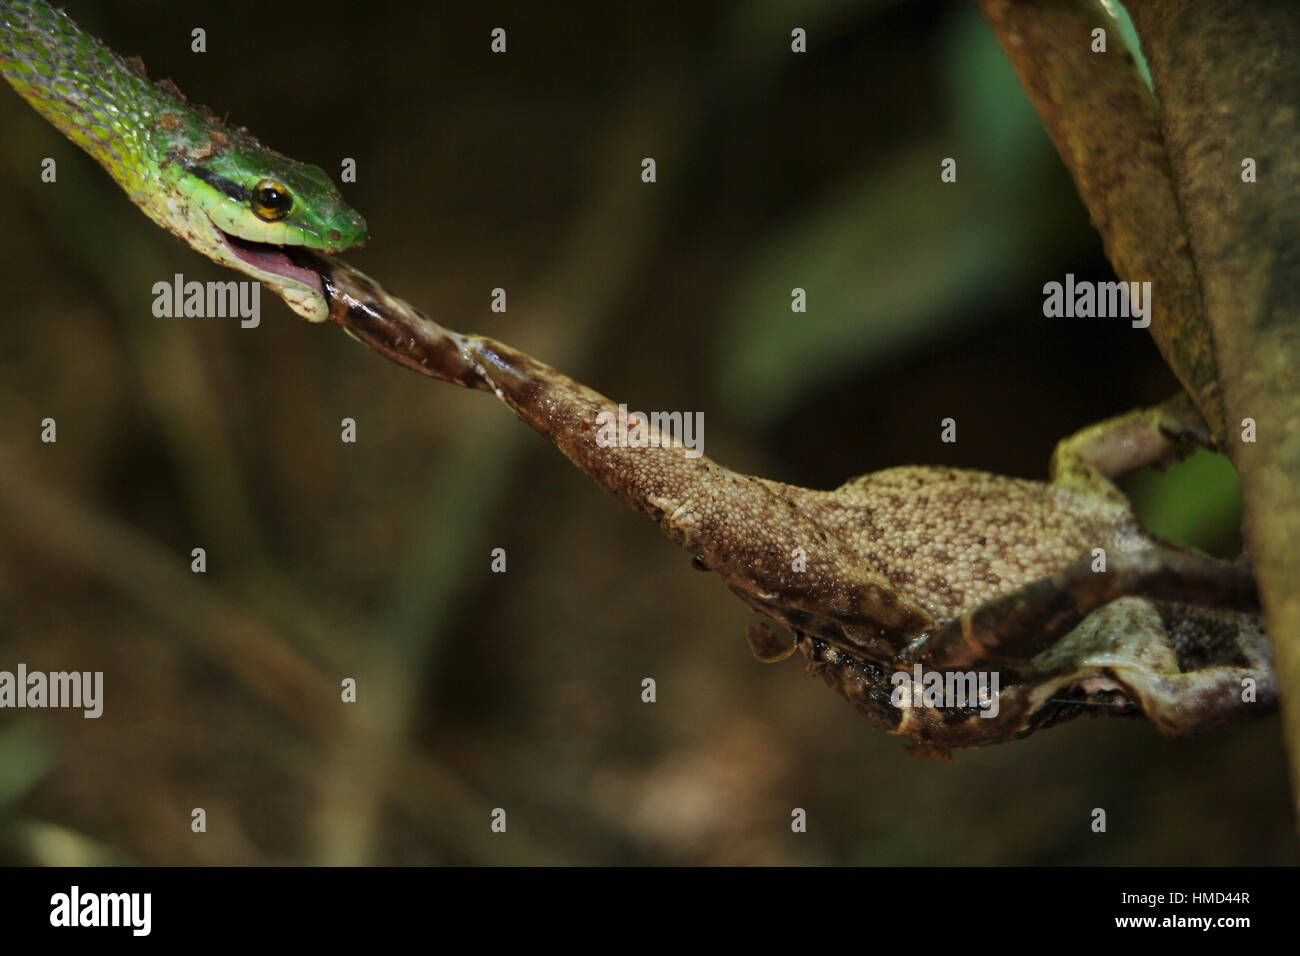 Green Parrot Snake (Leptophis ahaetulla) catching a Smooth-skinned Toad (Bufo haematiticus) on a river bank. Corcovado National Park, Osa Peninsula, C Stock Photo